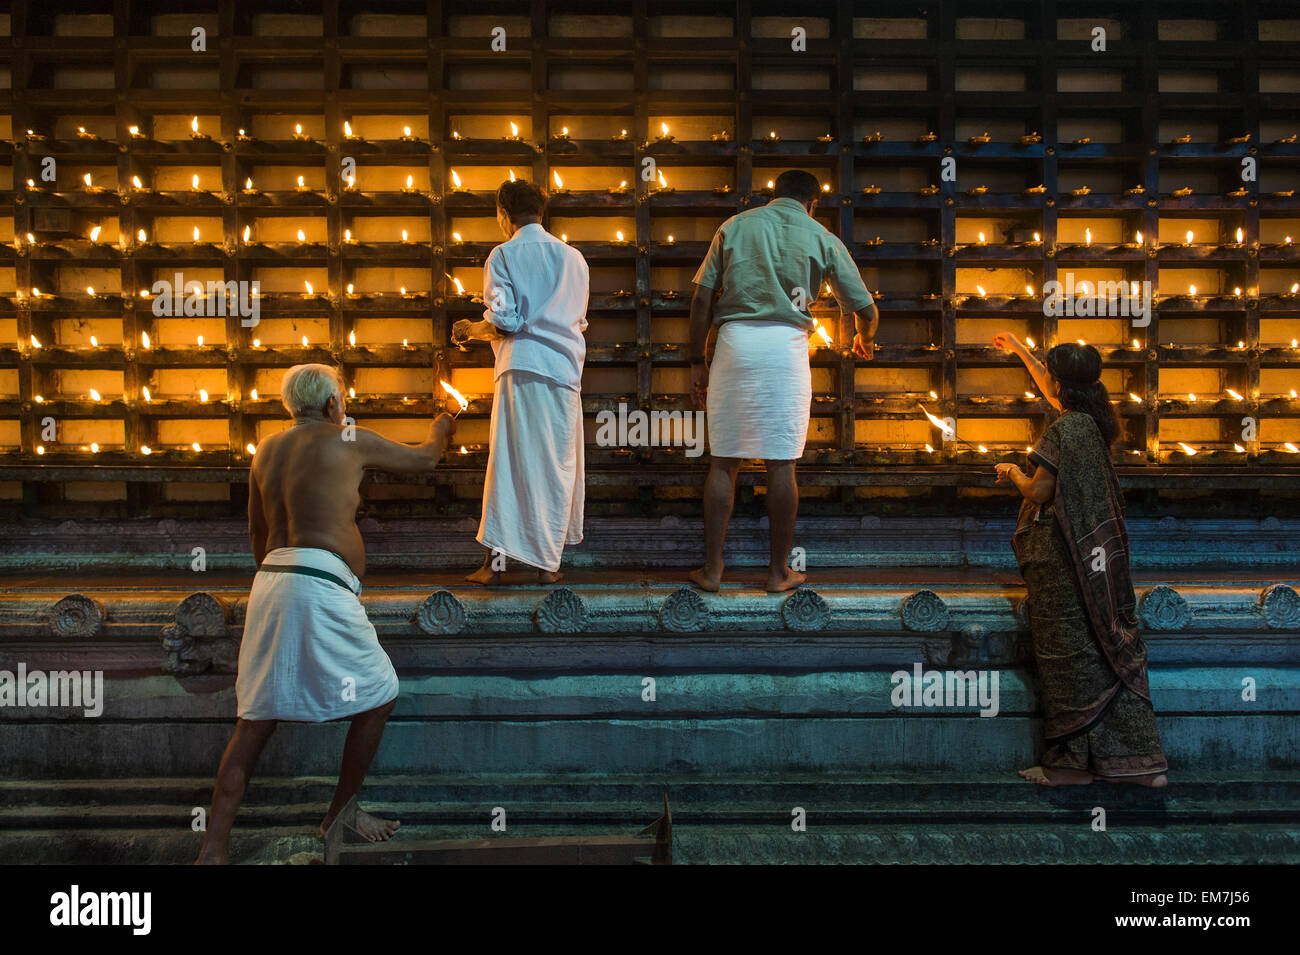 Oil lamps being lit in niches on the outer wall of the temple for the Hindu fire ceremony Aarti, Ambalapuzha, Kerala, India Stock Photo